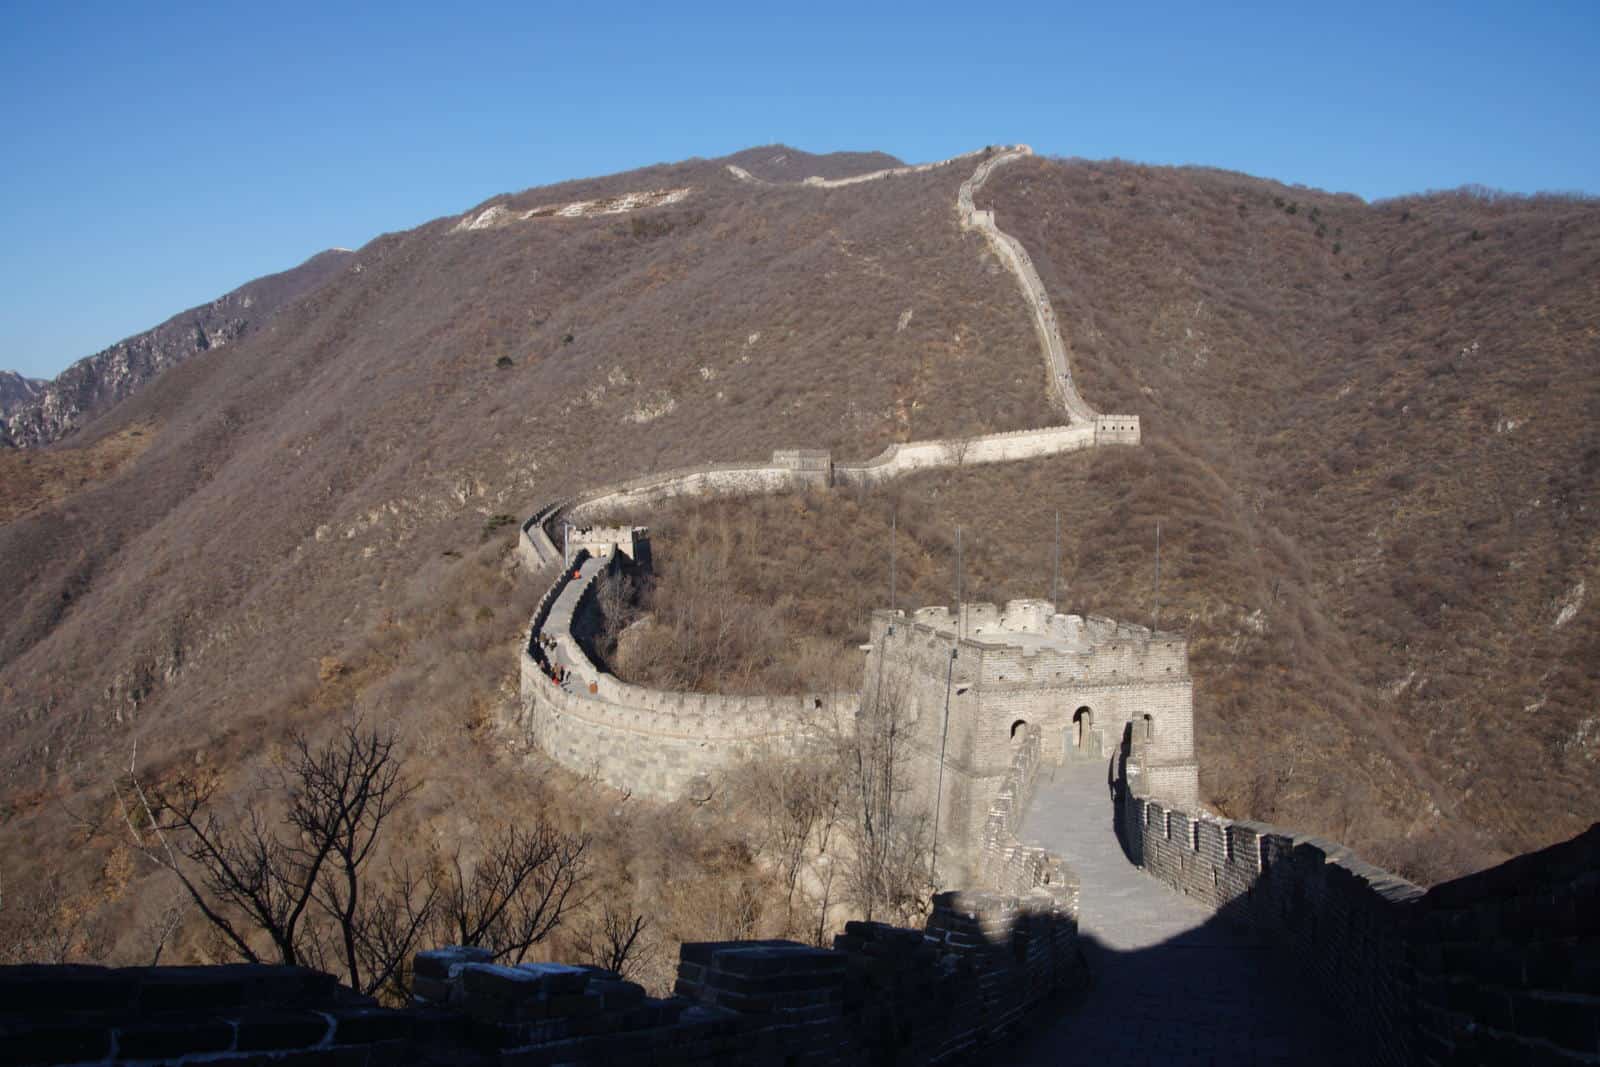 Visiting The Great Wall of China in WInter